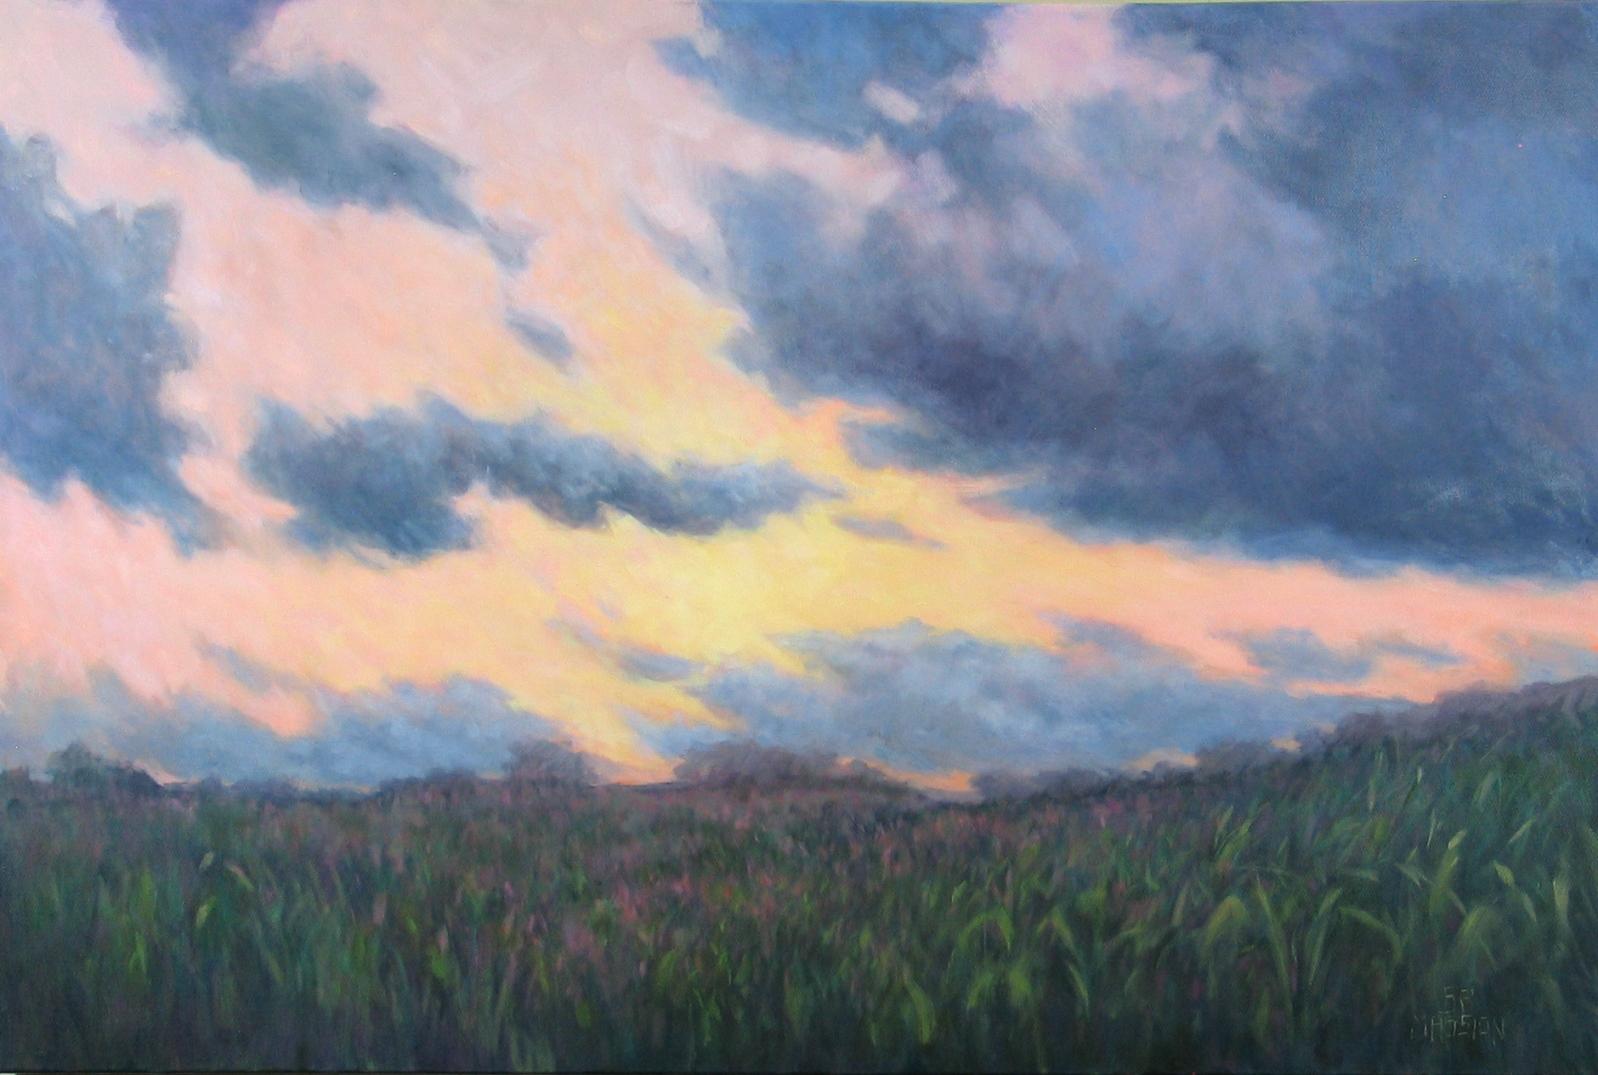 Twilight Time Remembered, Oil Painting - Art by Suzanne Massion